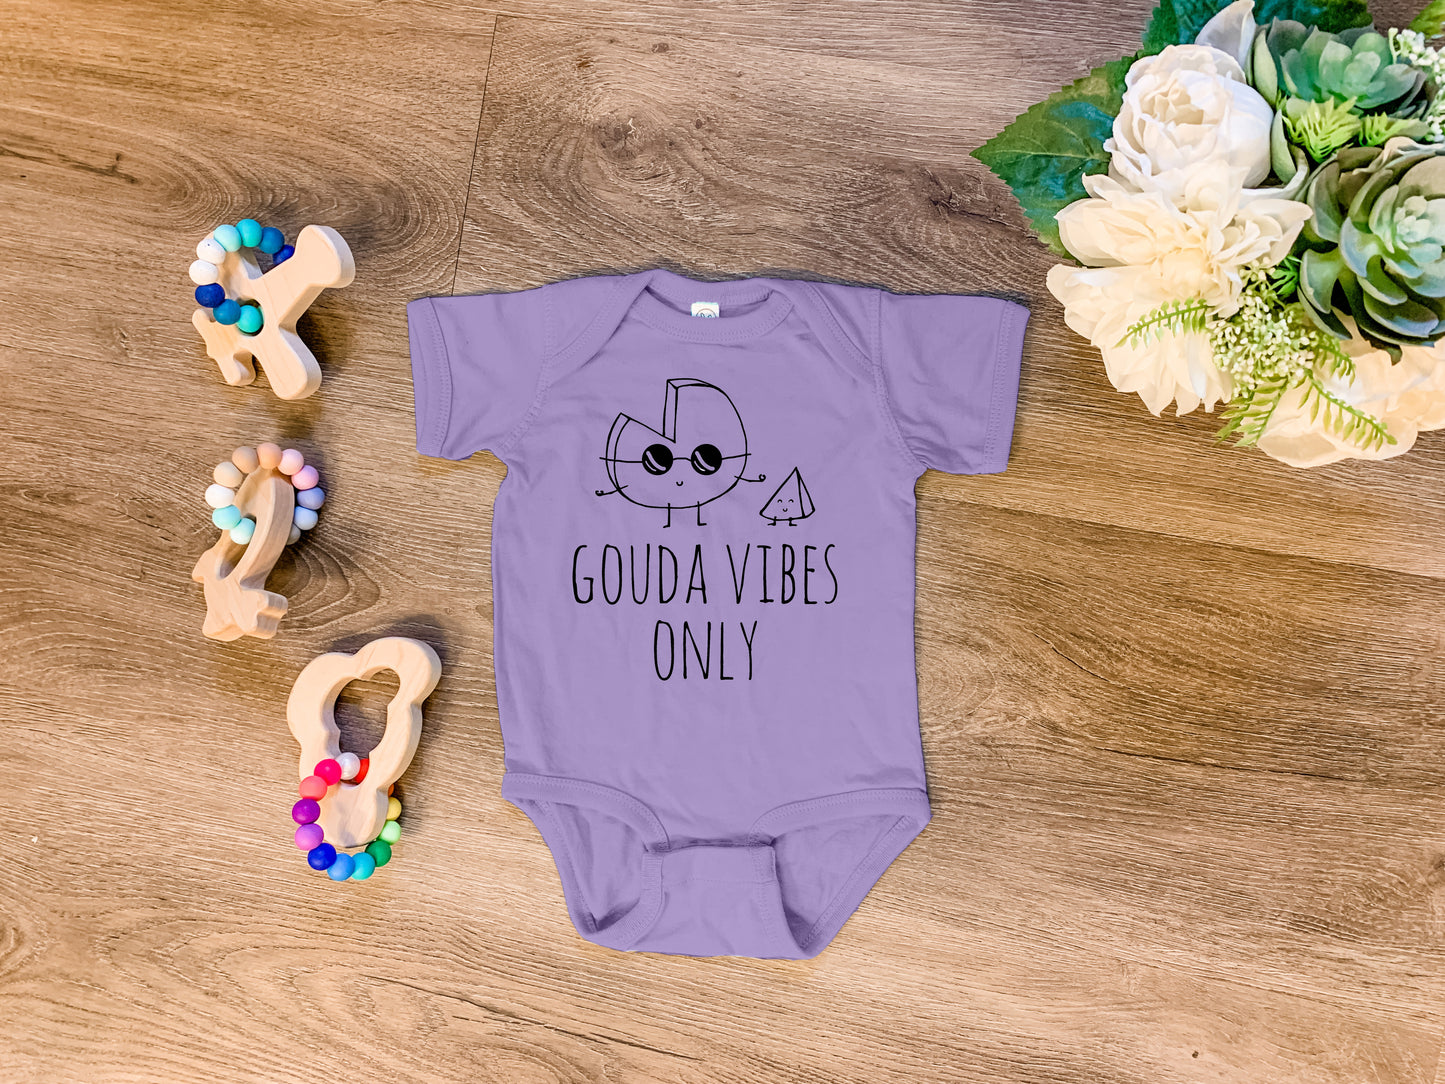 Gouda Vibes Only - Onesie - Heather Gray, Chill, or Lavender